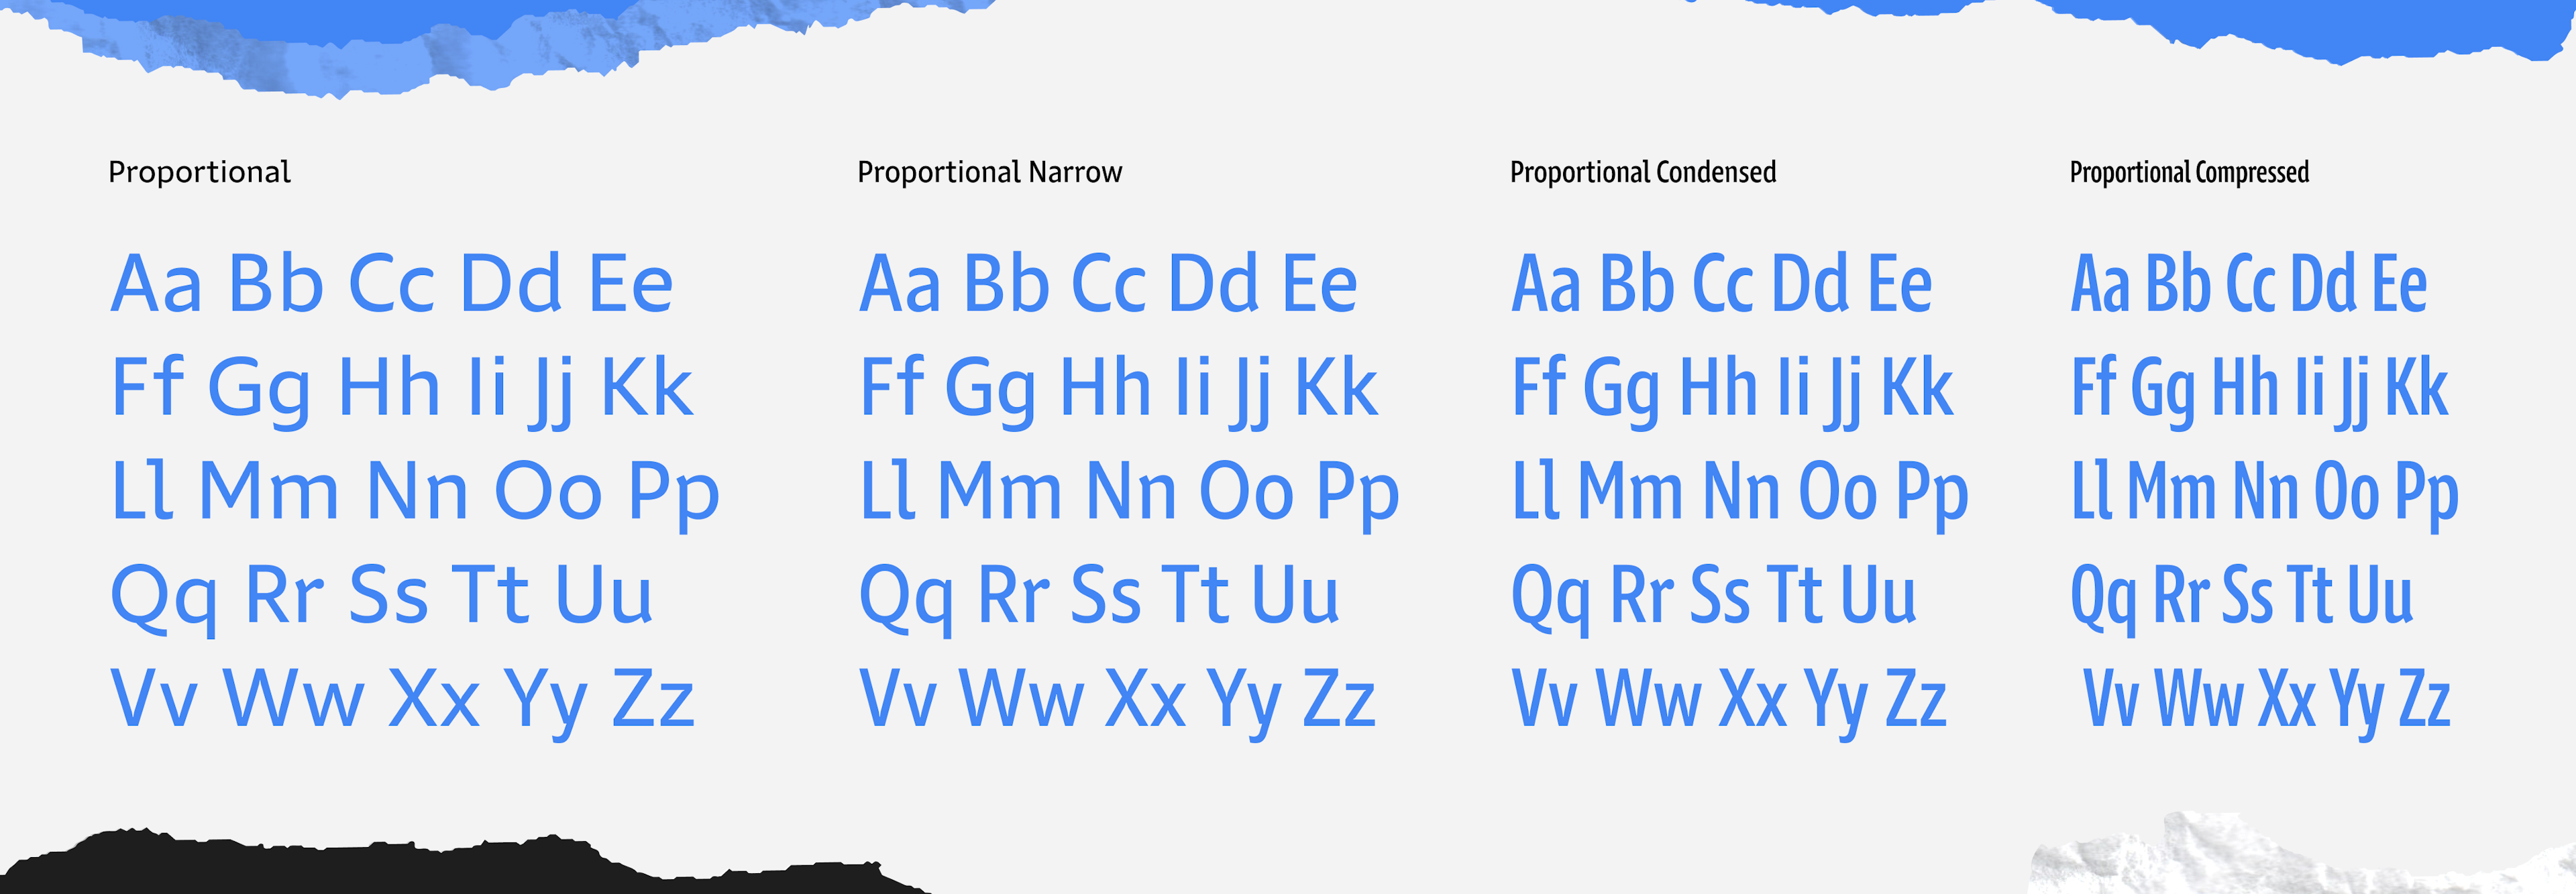 <b class="accent">FIG. 3 — </b> Comparison of Portamento’s Proportional fonts progressing from Normal to Compressed.